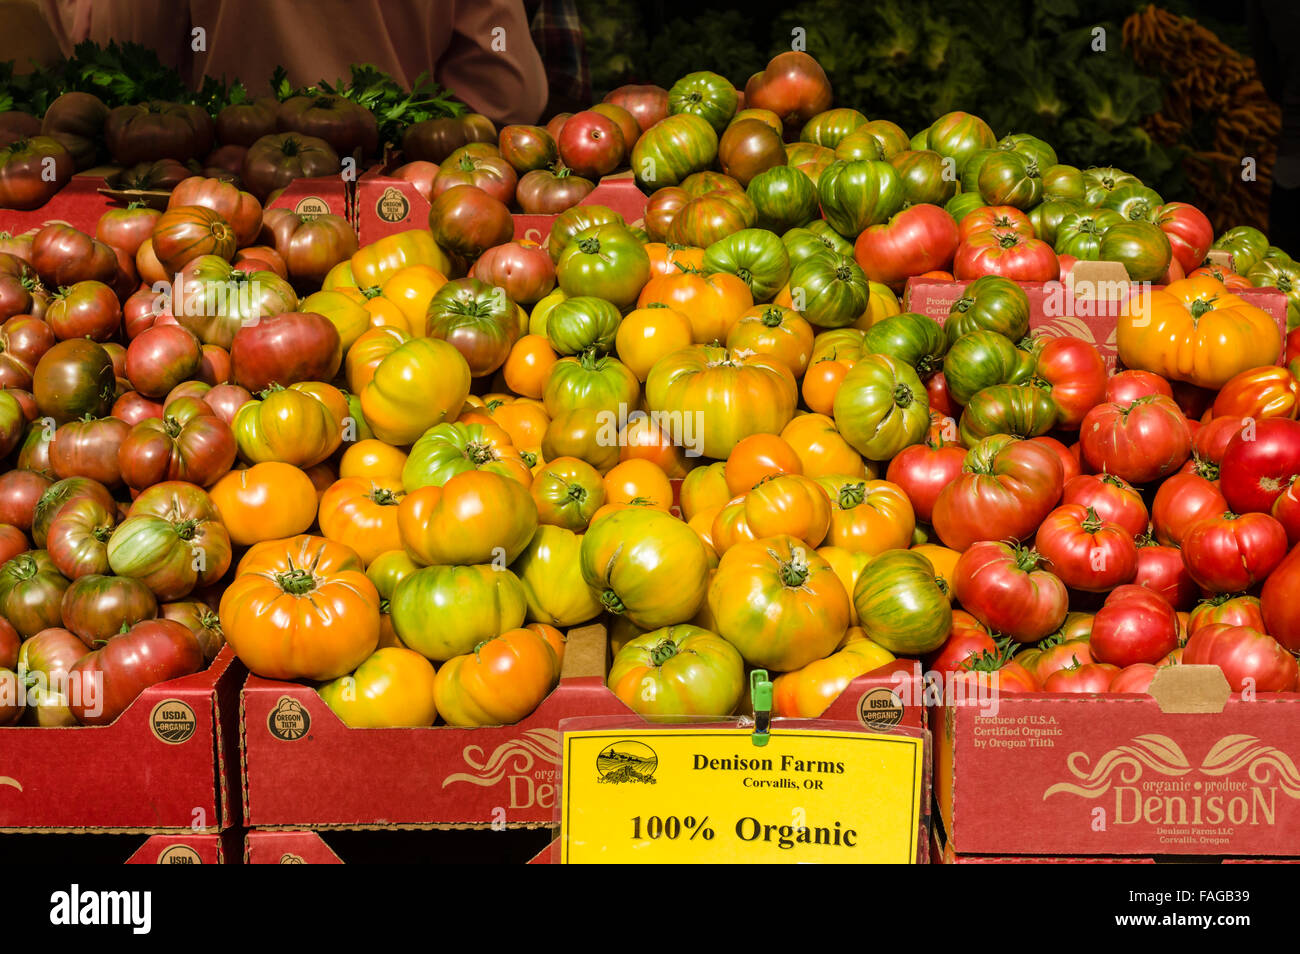 Heirloom tomatoes in boxes on display at a farmer's market in Beaverton, Oregon, USA Stock Photo